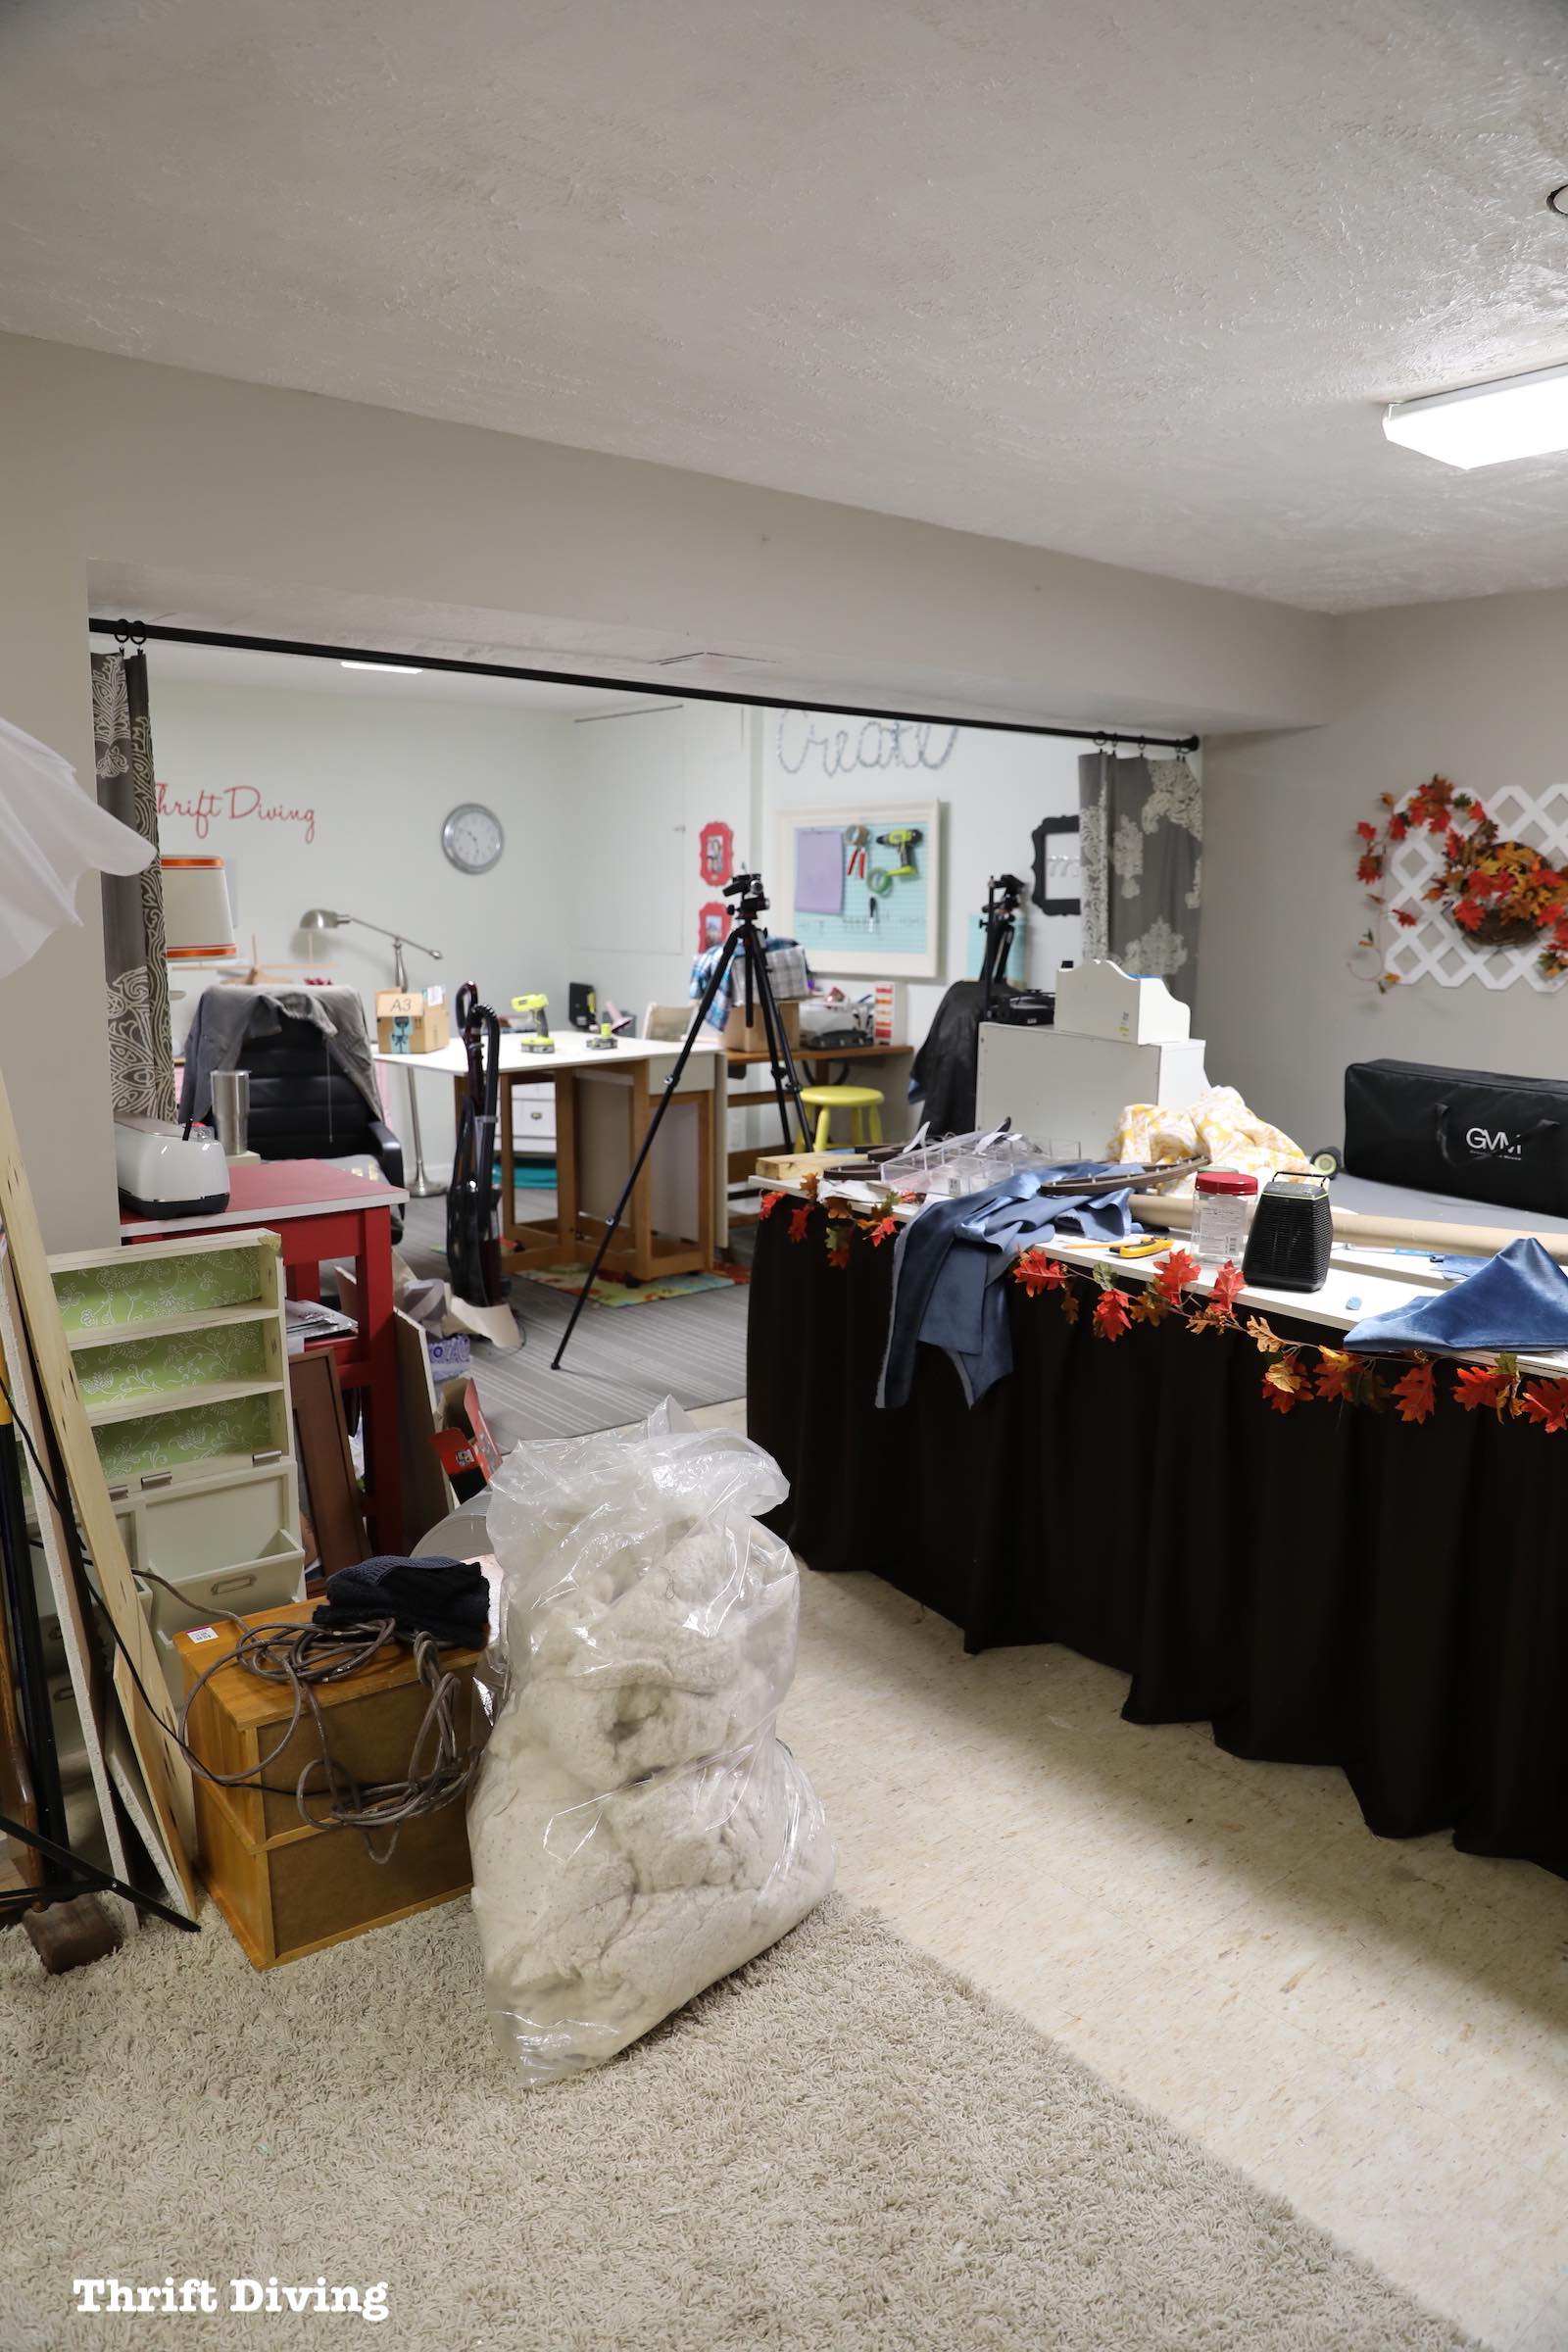 Basement office needs a makeover and storage ideas. - Thrift Diving